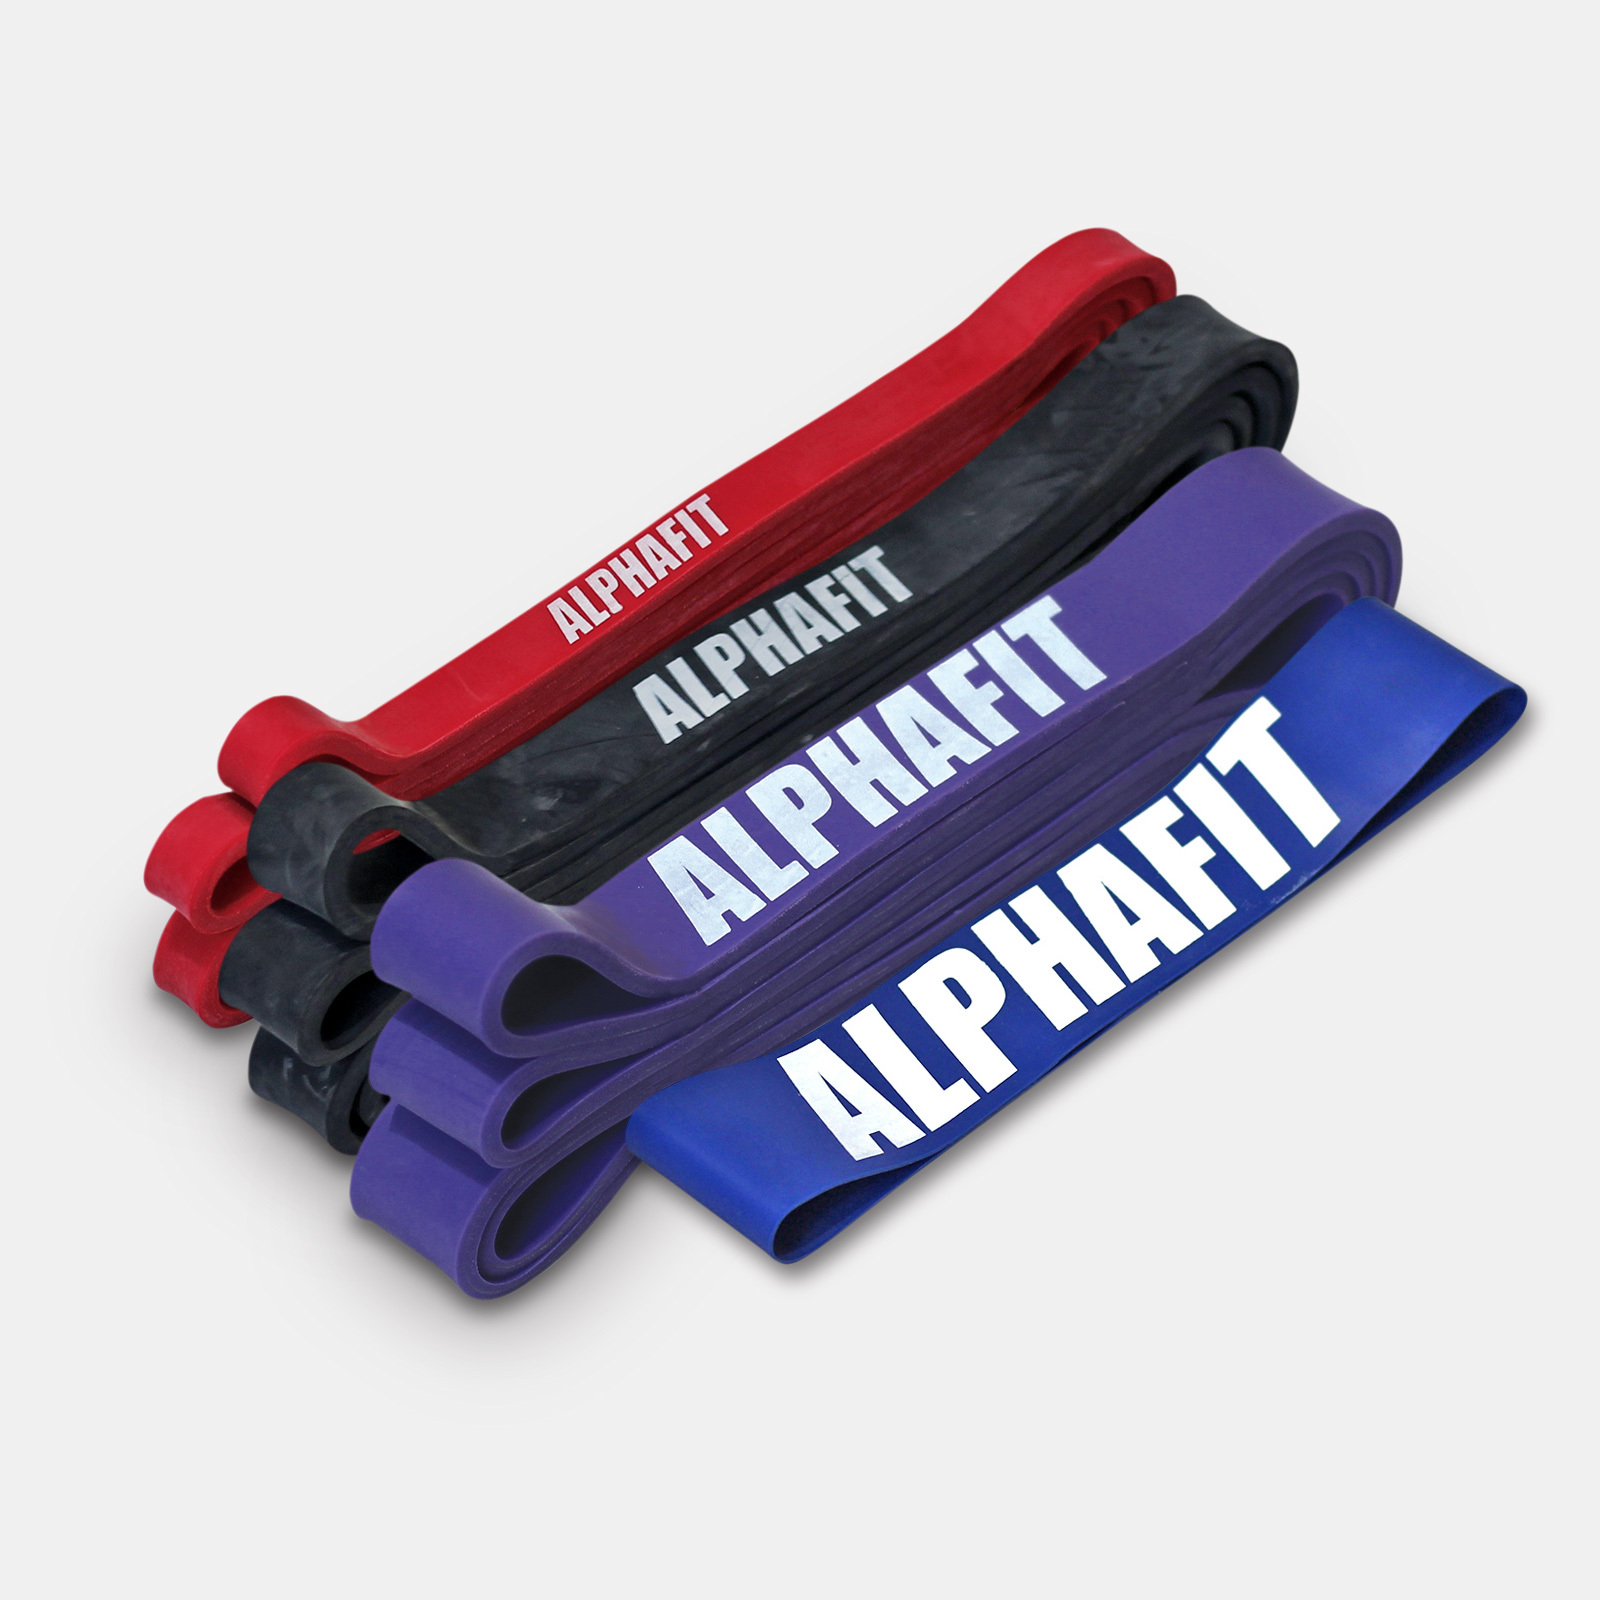 NQ Fit Factory Band Pack image